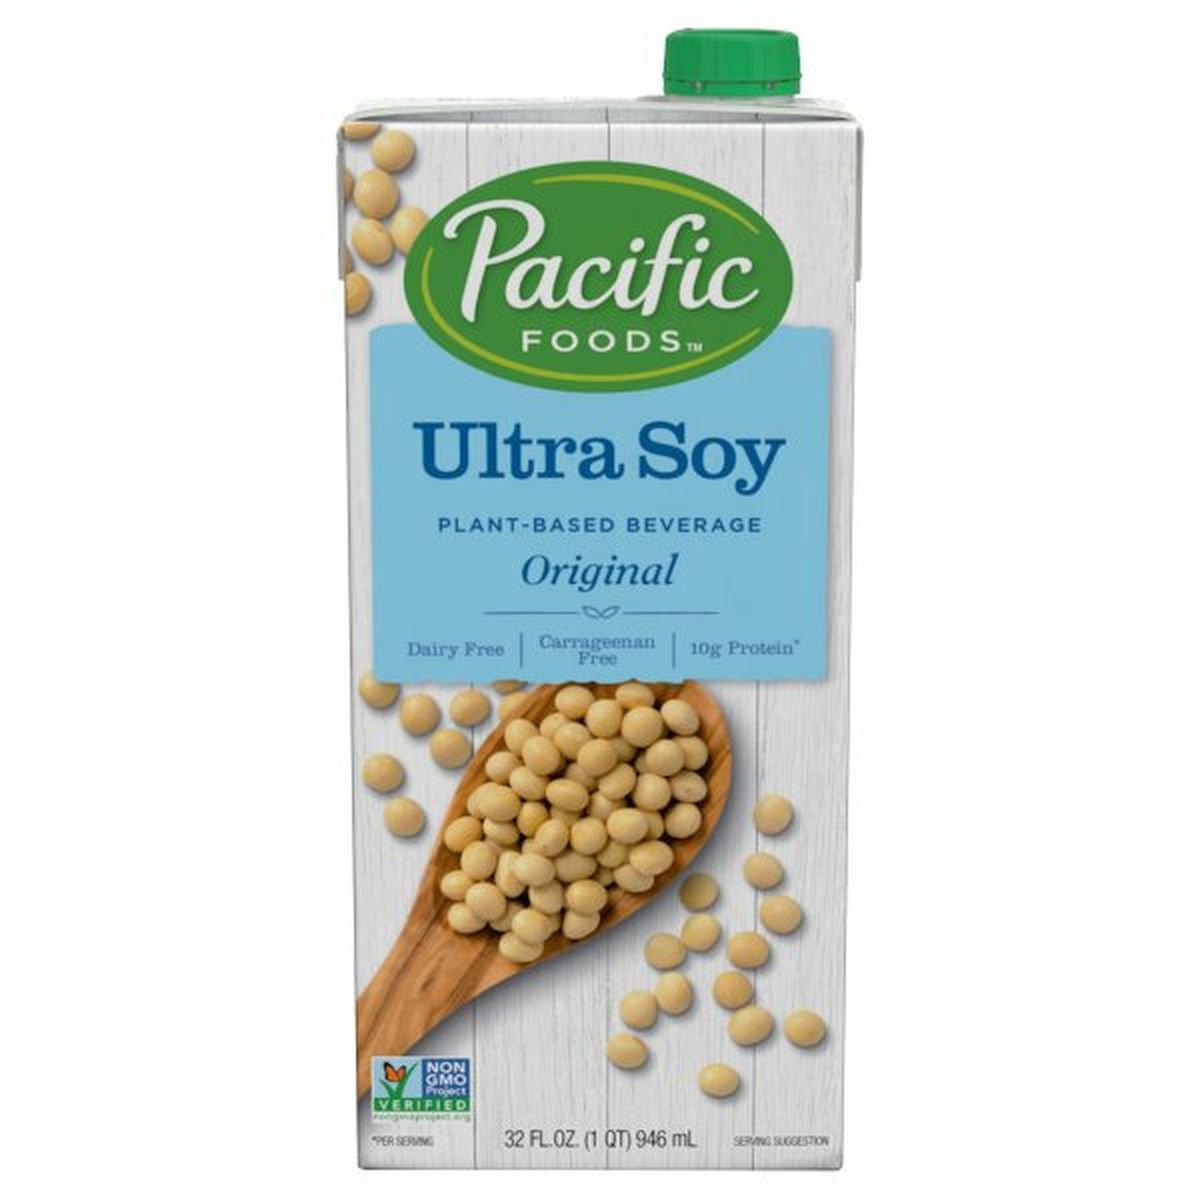 Calories in Pacific Beverage, Plant-Based, Ultra Soy, Original